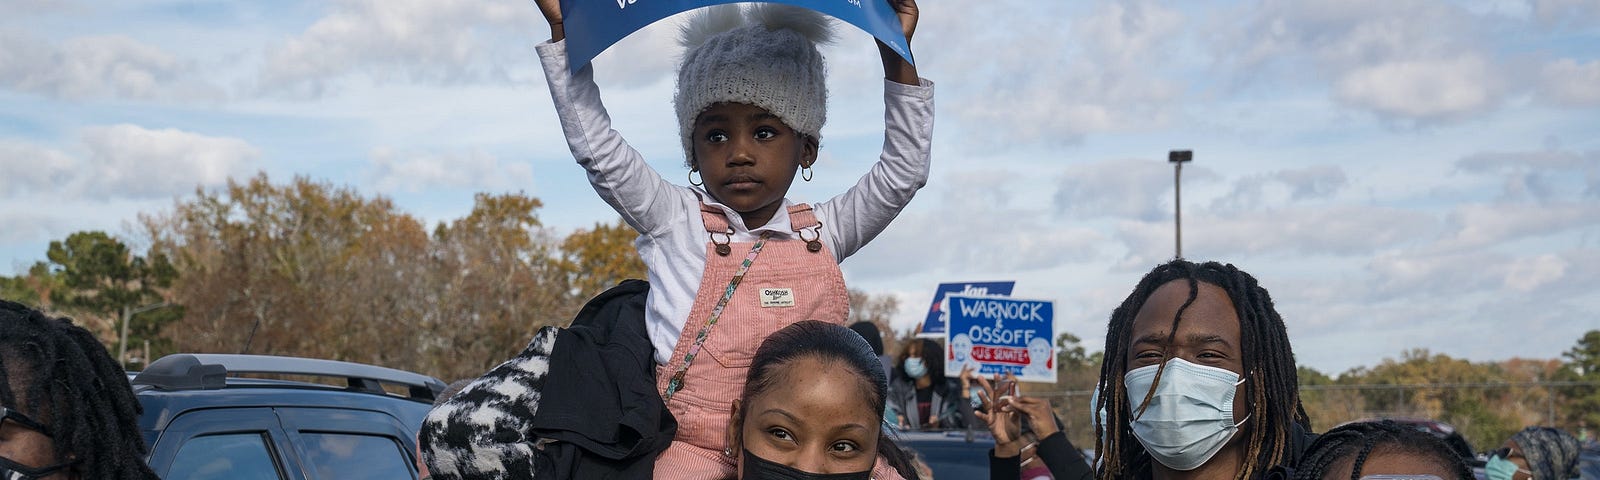 A child holding a sign sits on the shoulders of a young woman